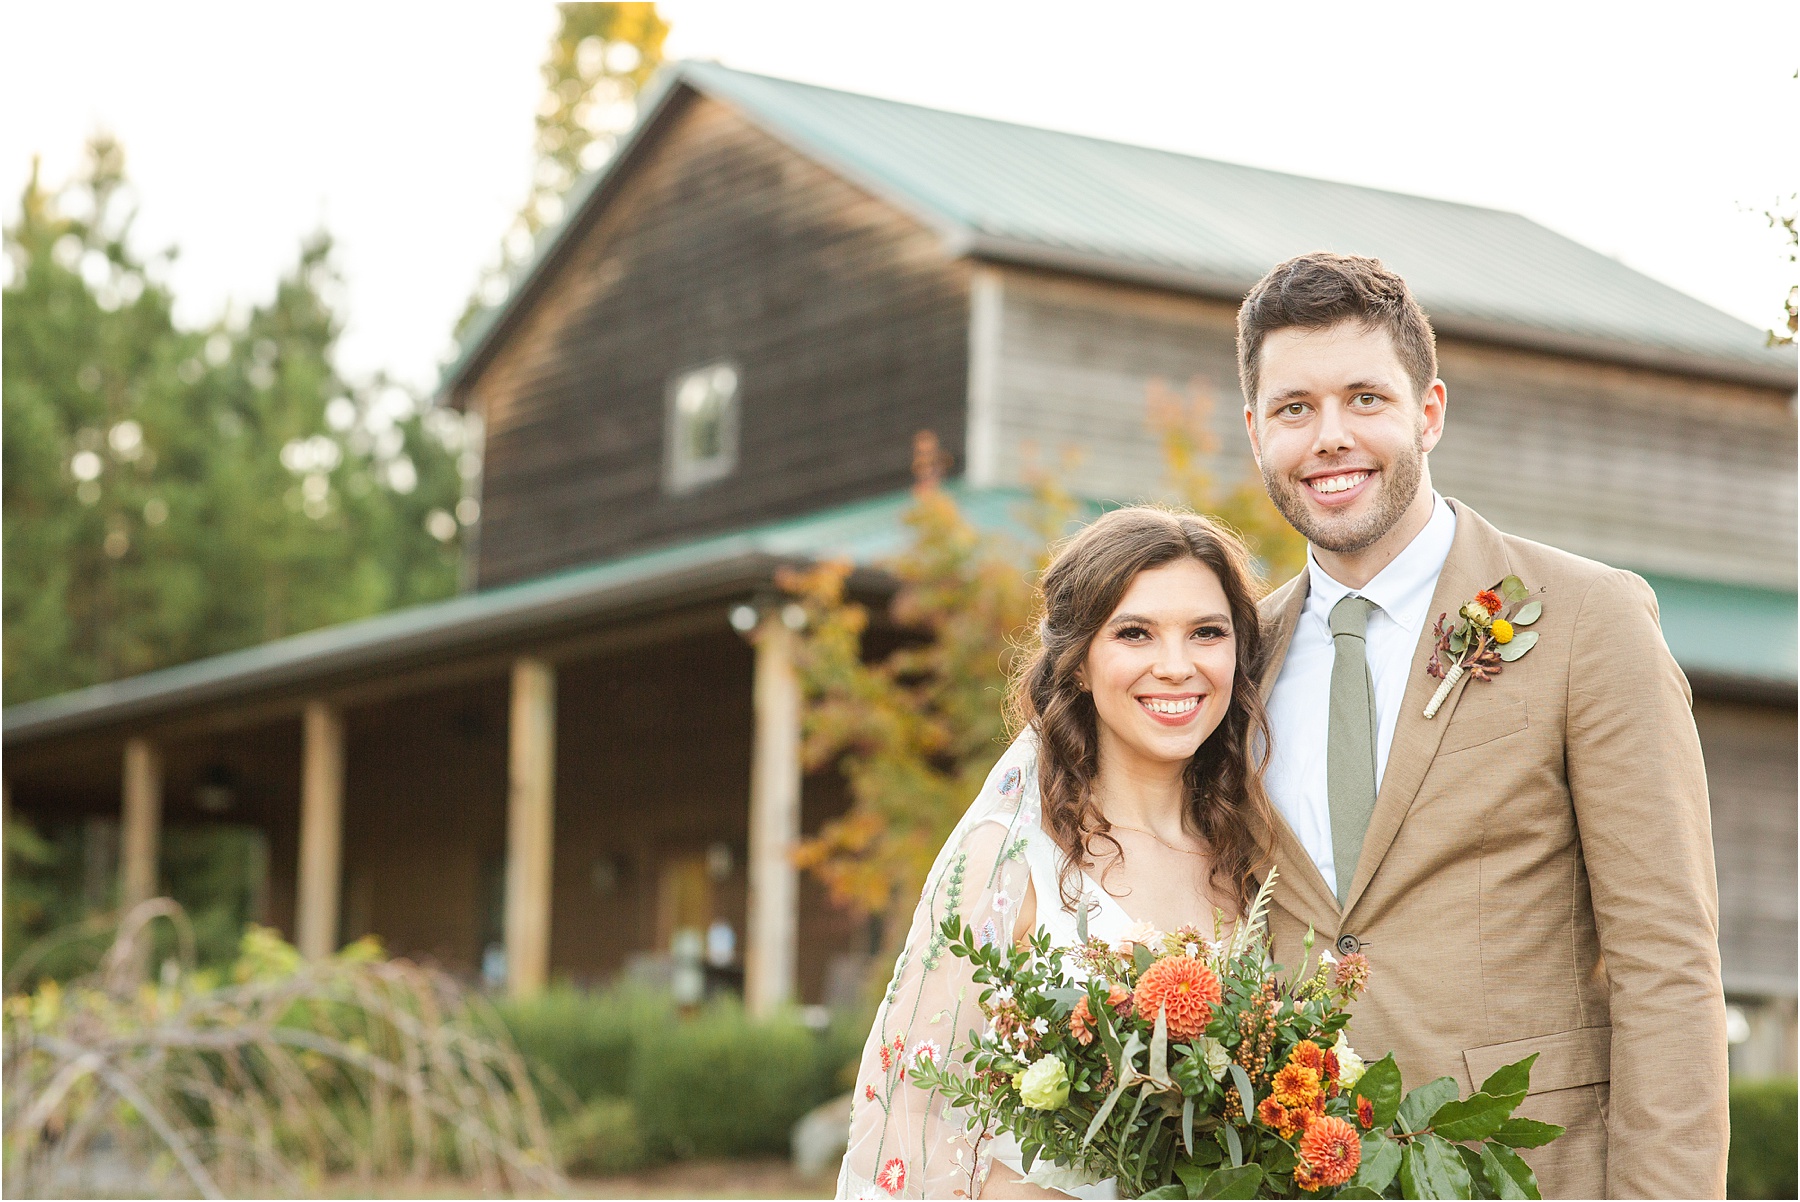 Groom with bride stands in front of old brown barn wedding venue